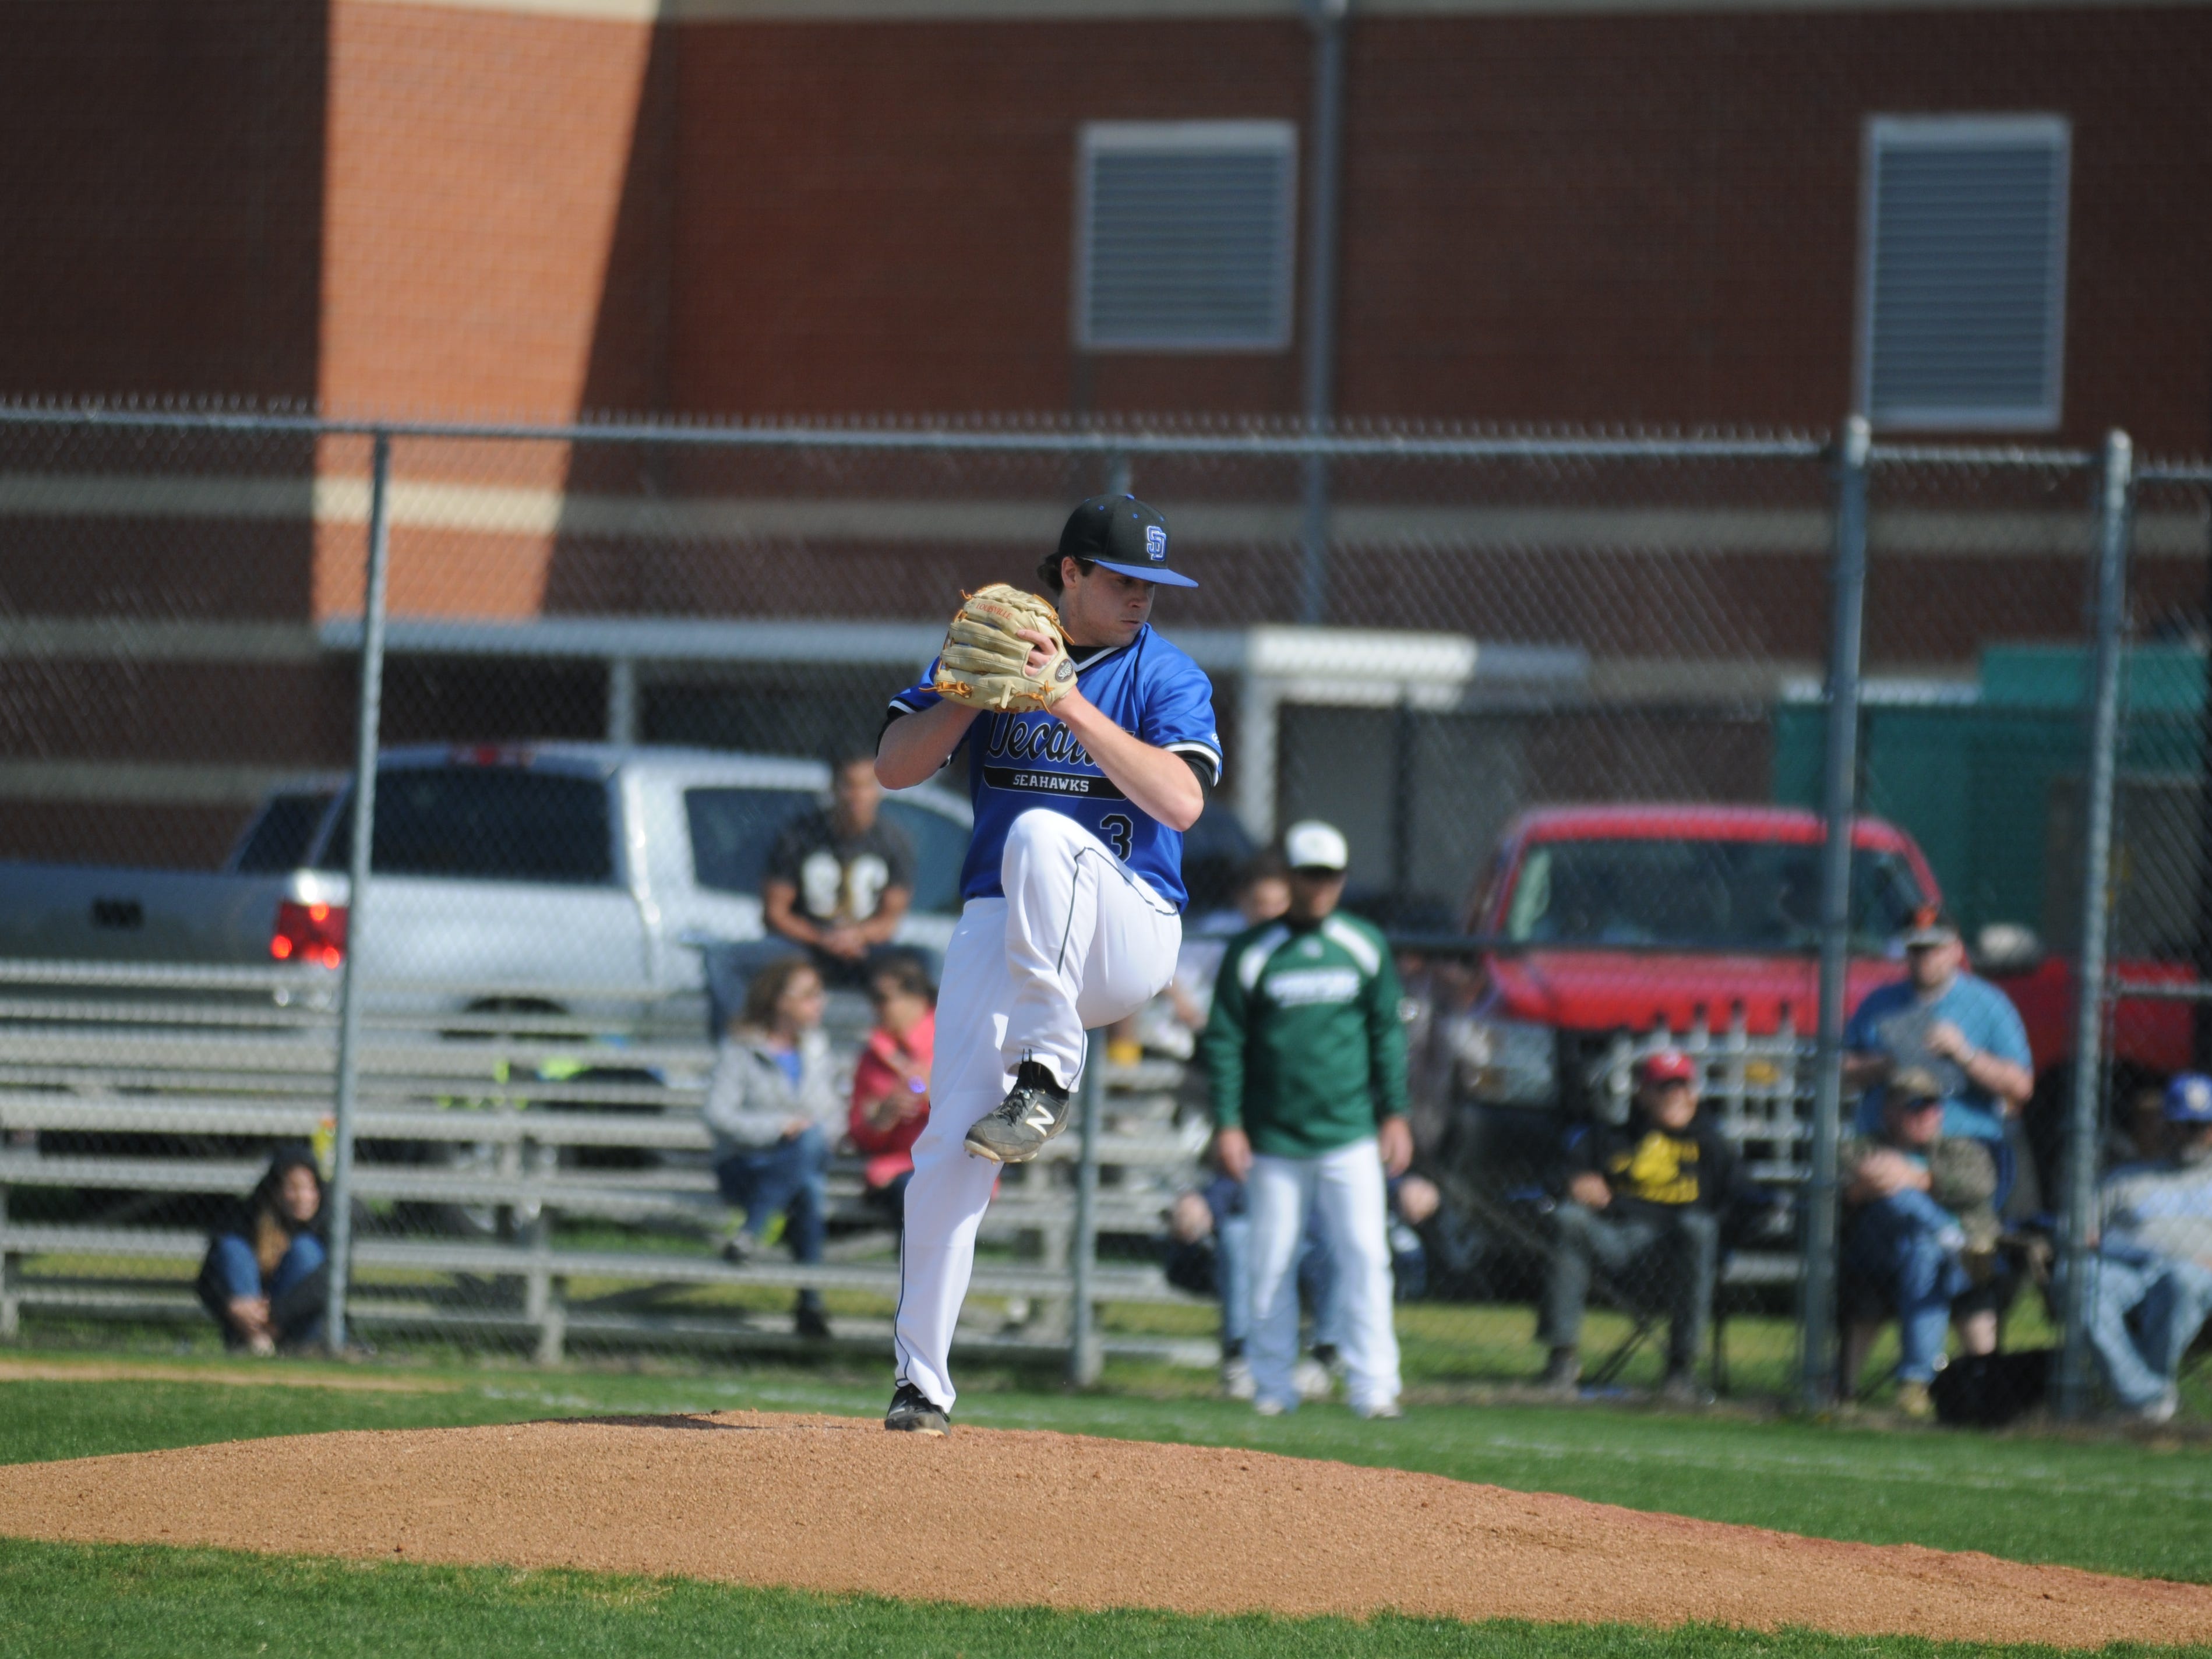 Stephen Decatur senior pitcher Grant Donahue delivers a pitch against Parkside on Wednesday in Berlin.